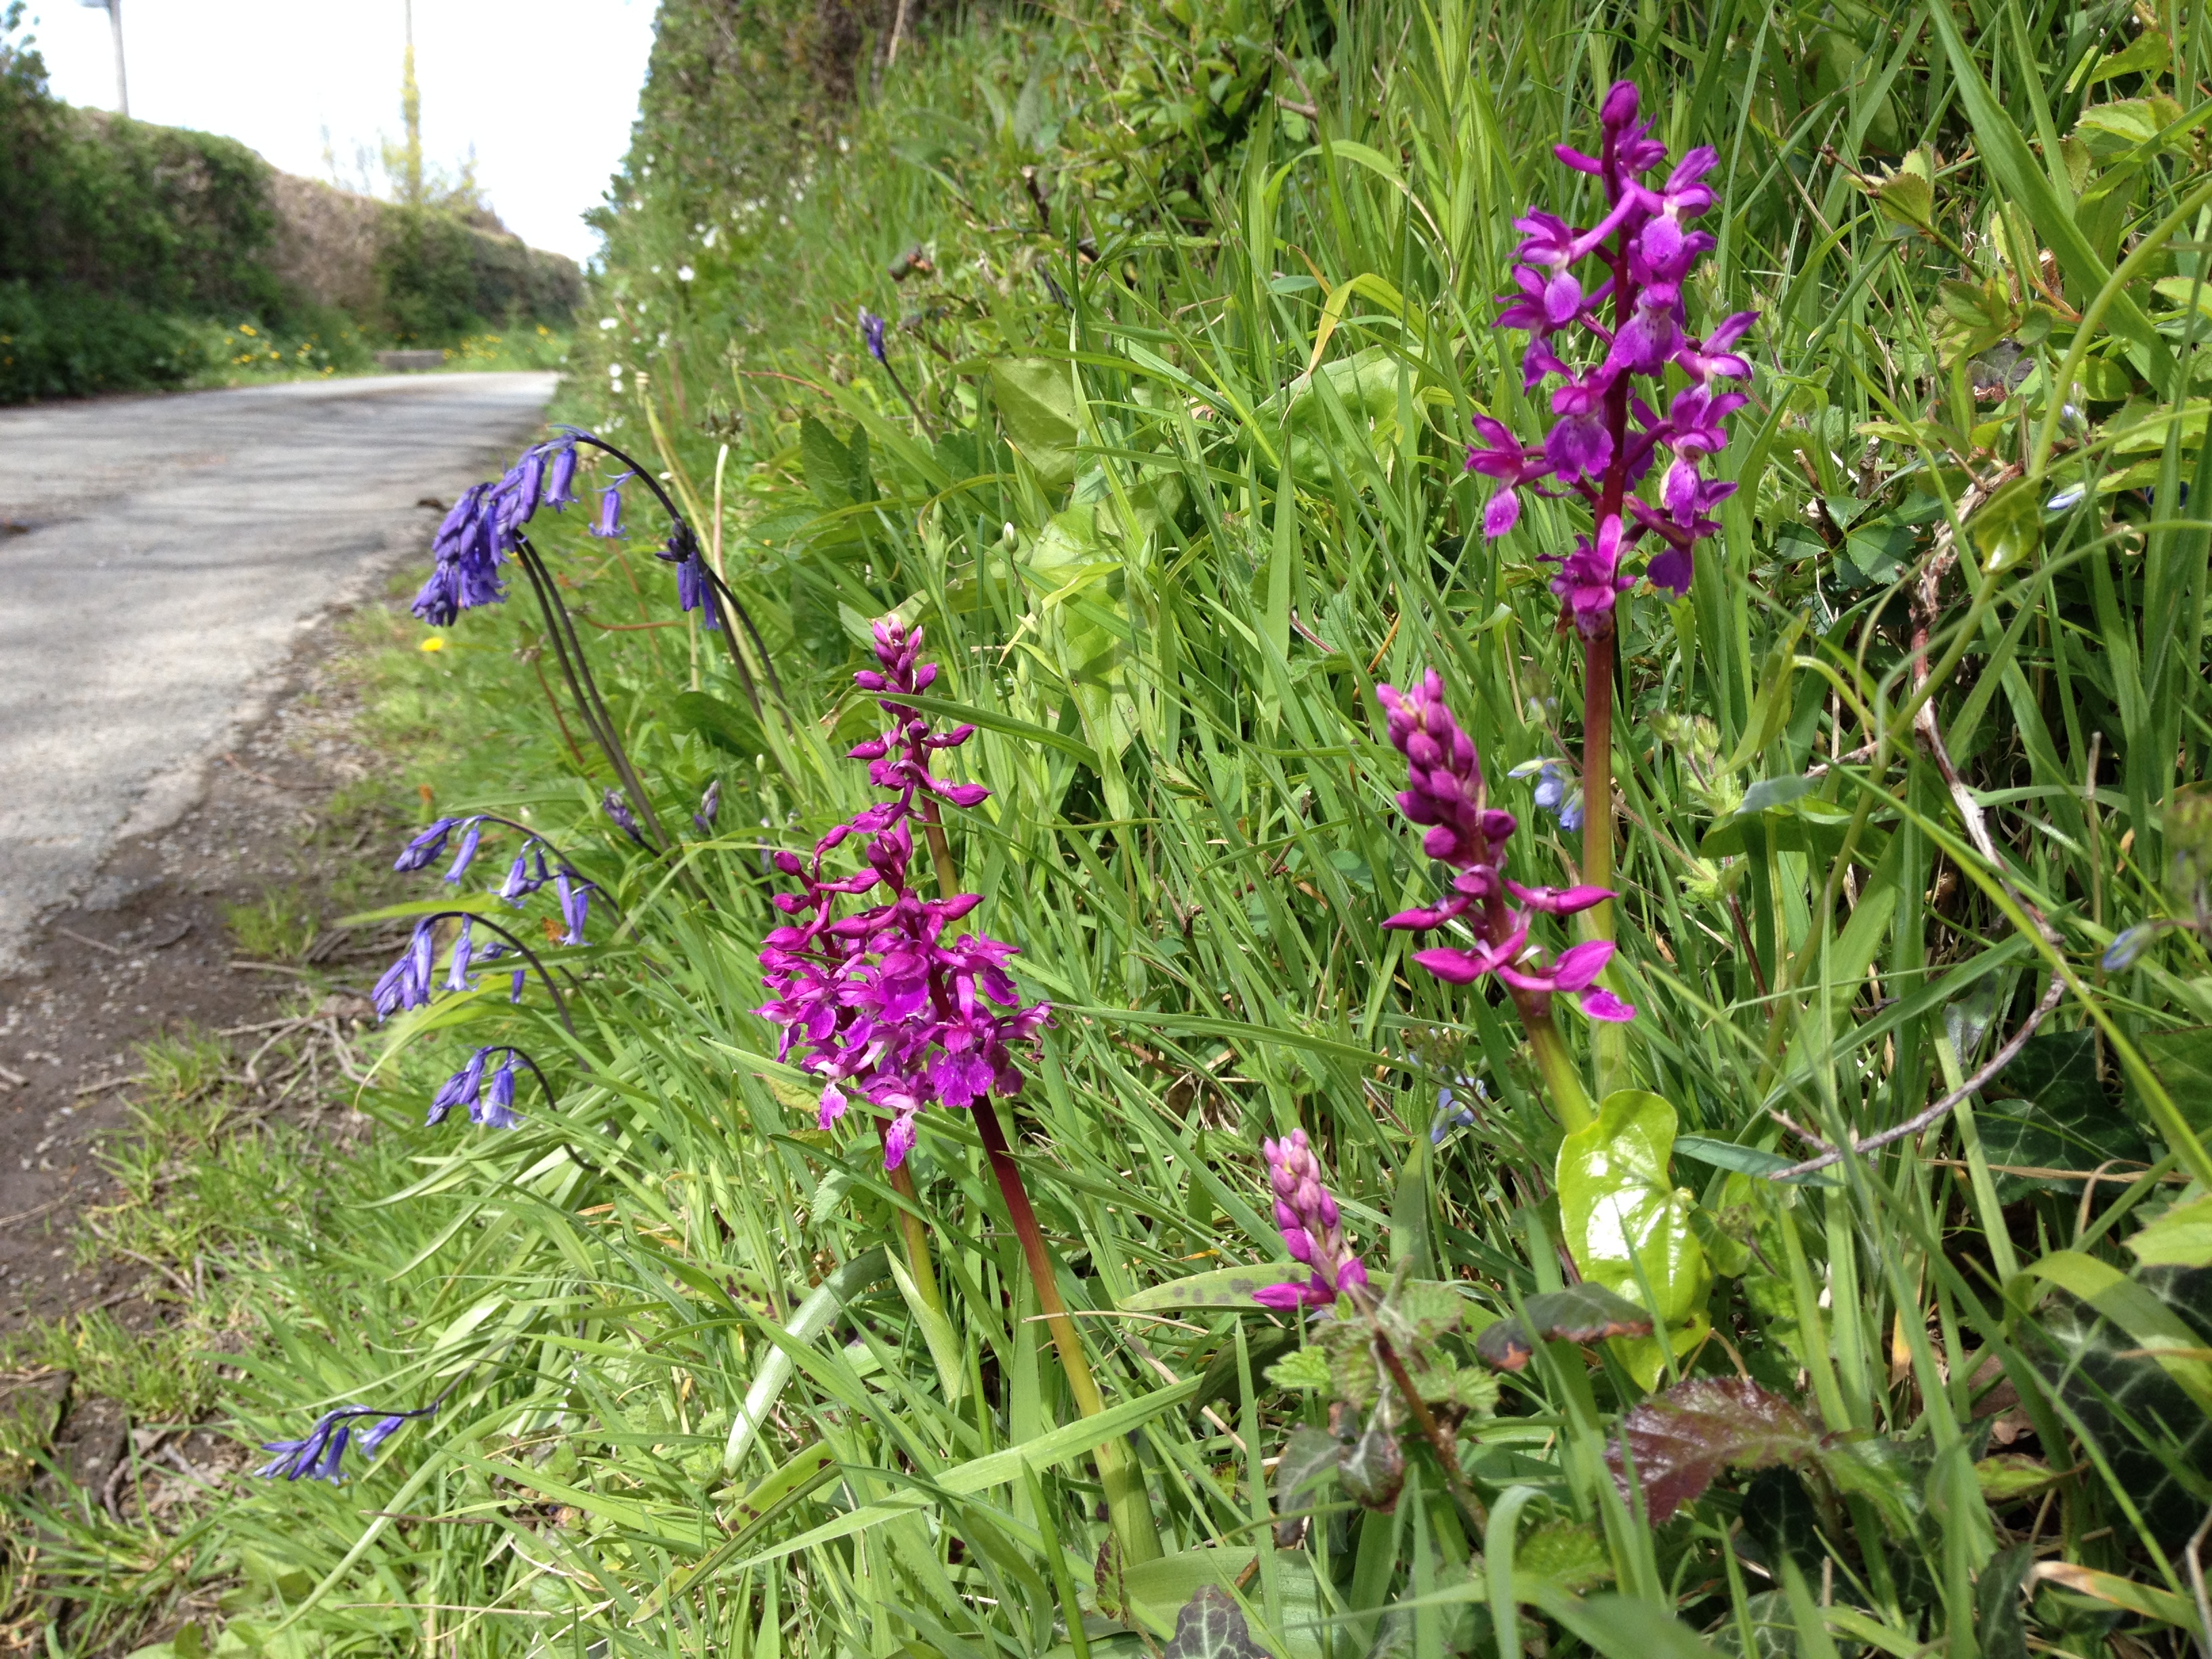 Early purple orchids on a road verge